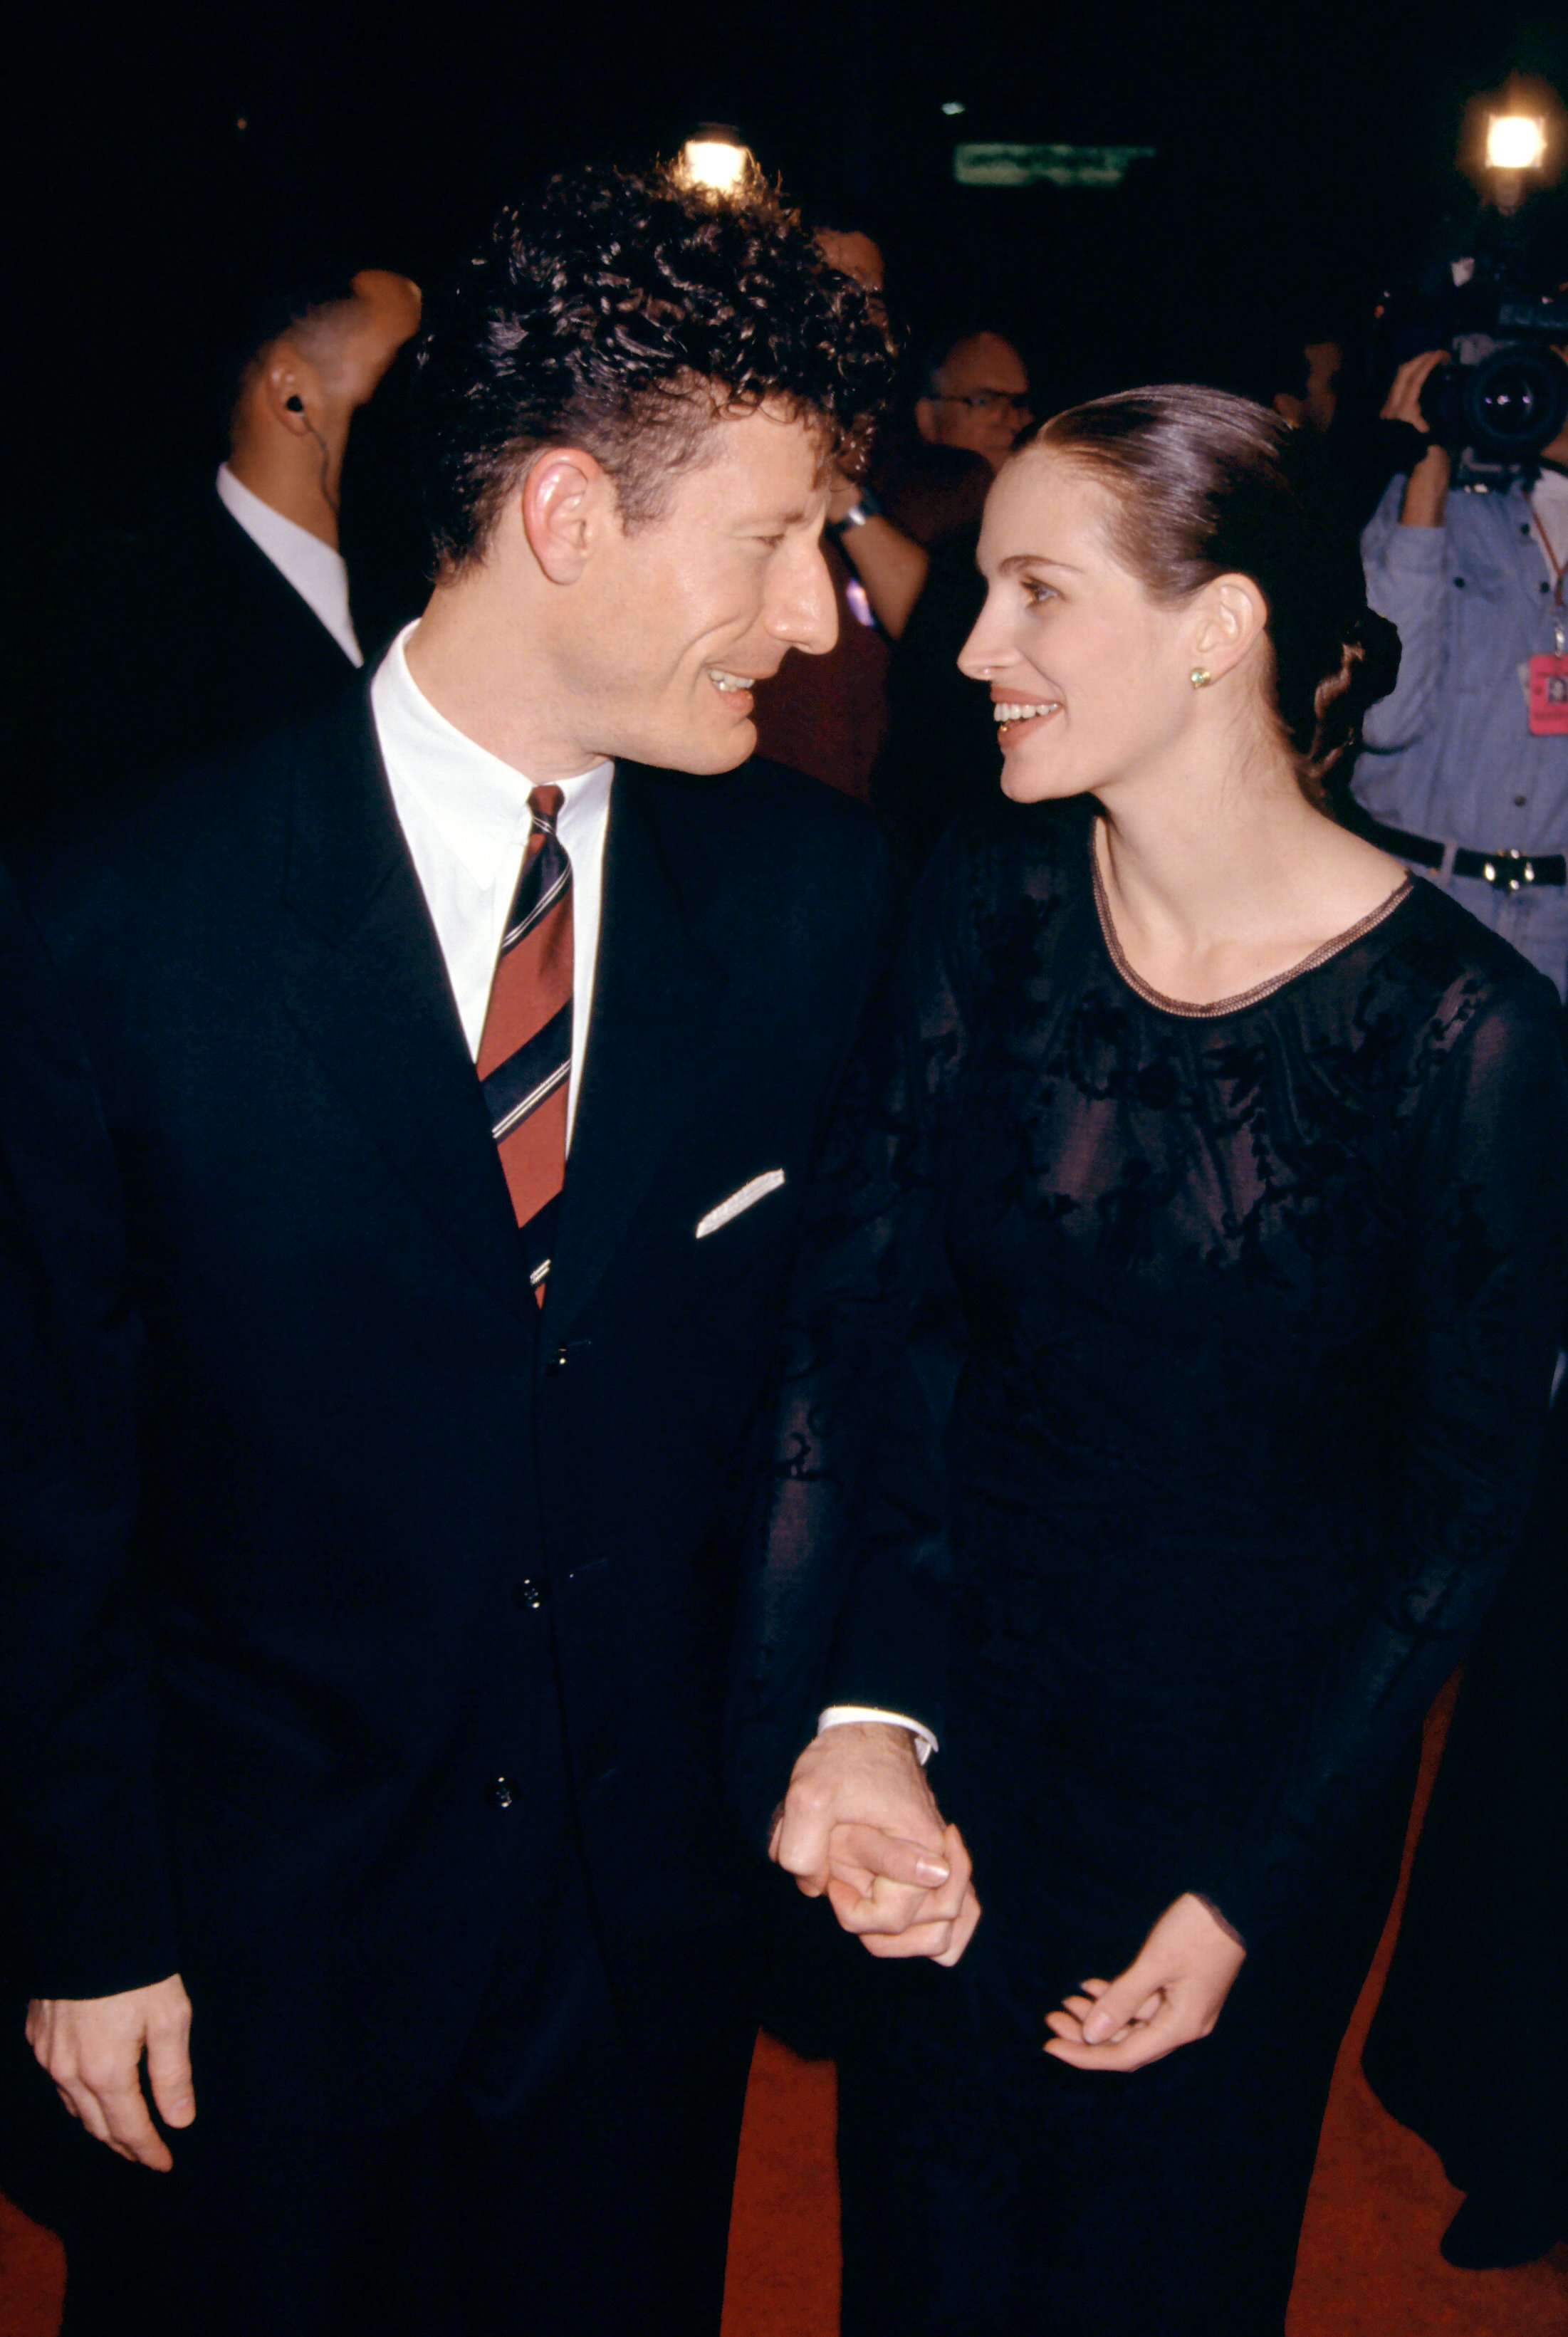 Singer Lyle Lovett and his wife, actress Julia Roberts during "The Pelican Brief" Westwood premiere at the Mann Bruin Theatre on December 13, 1993 in Westwood, California. / Source: Getty Images